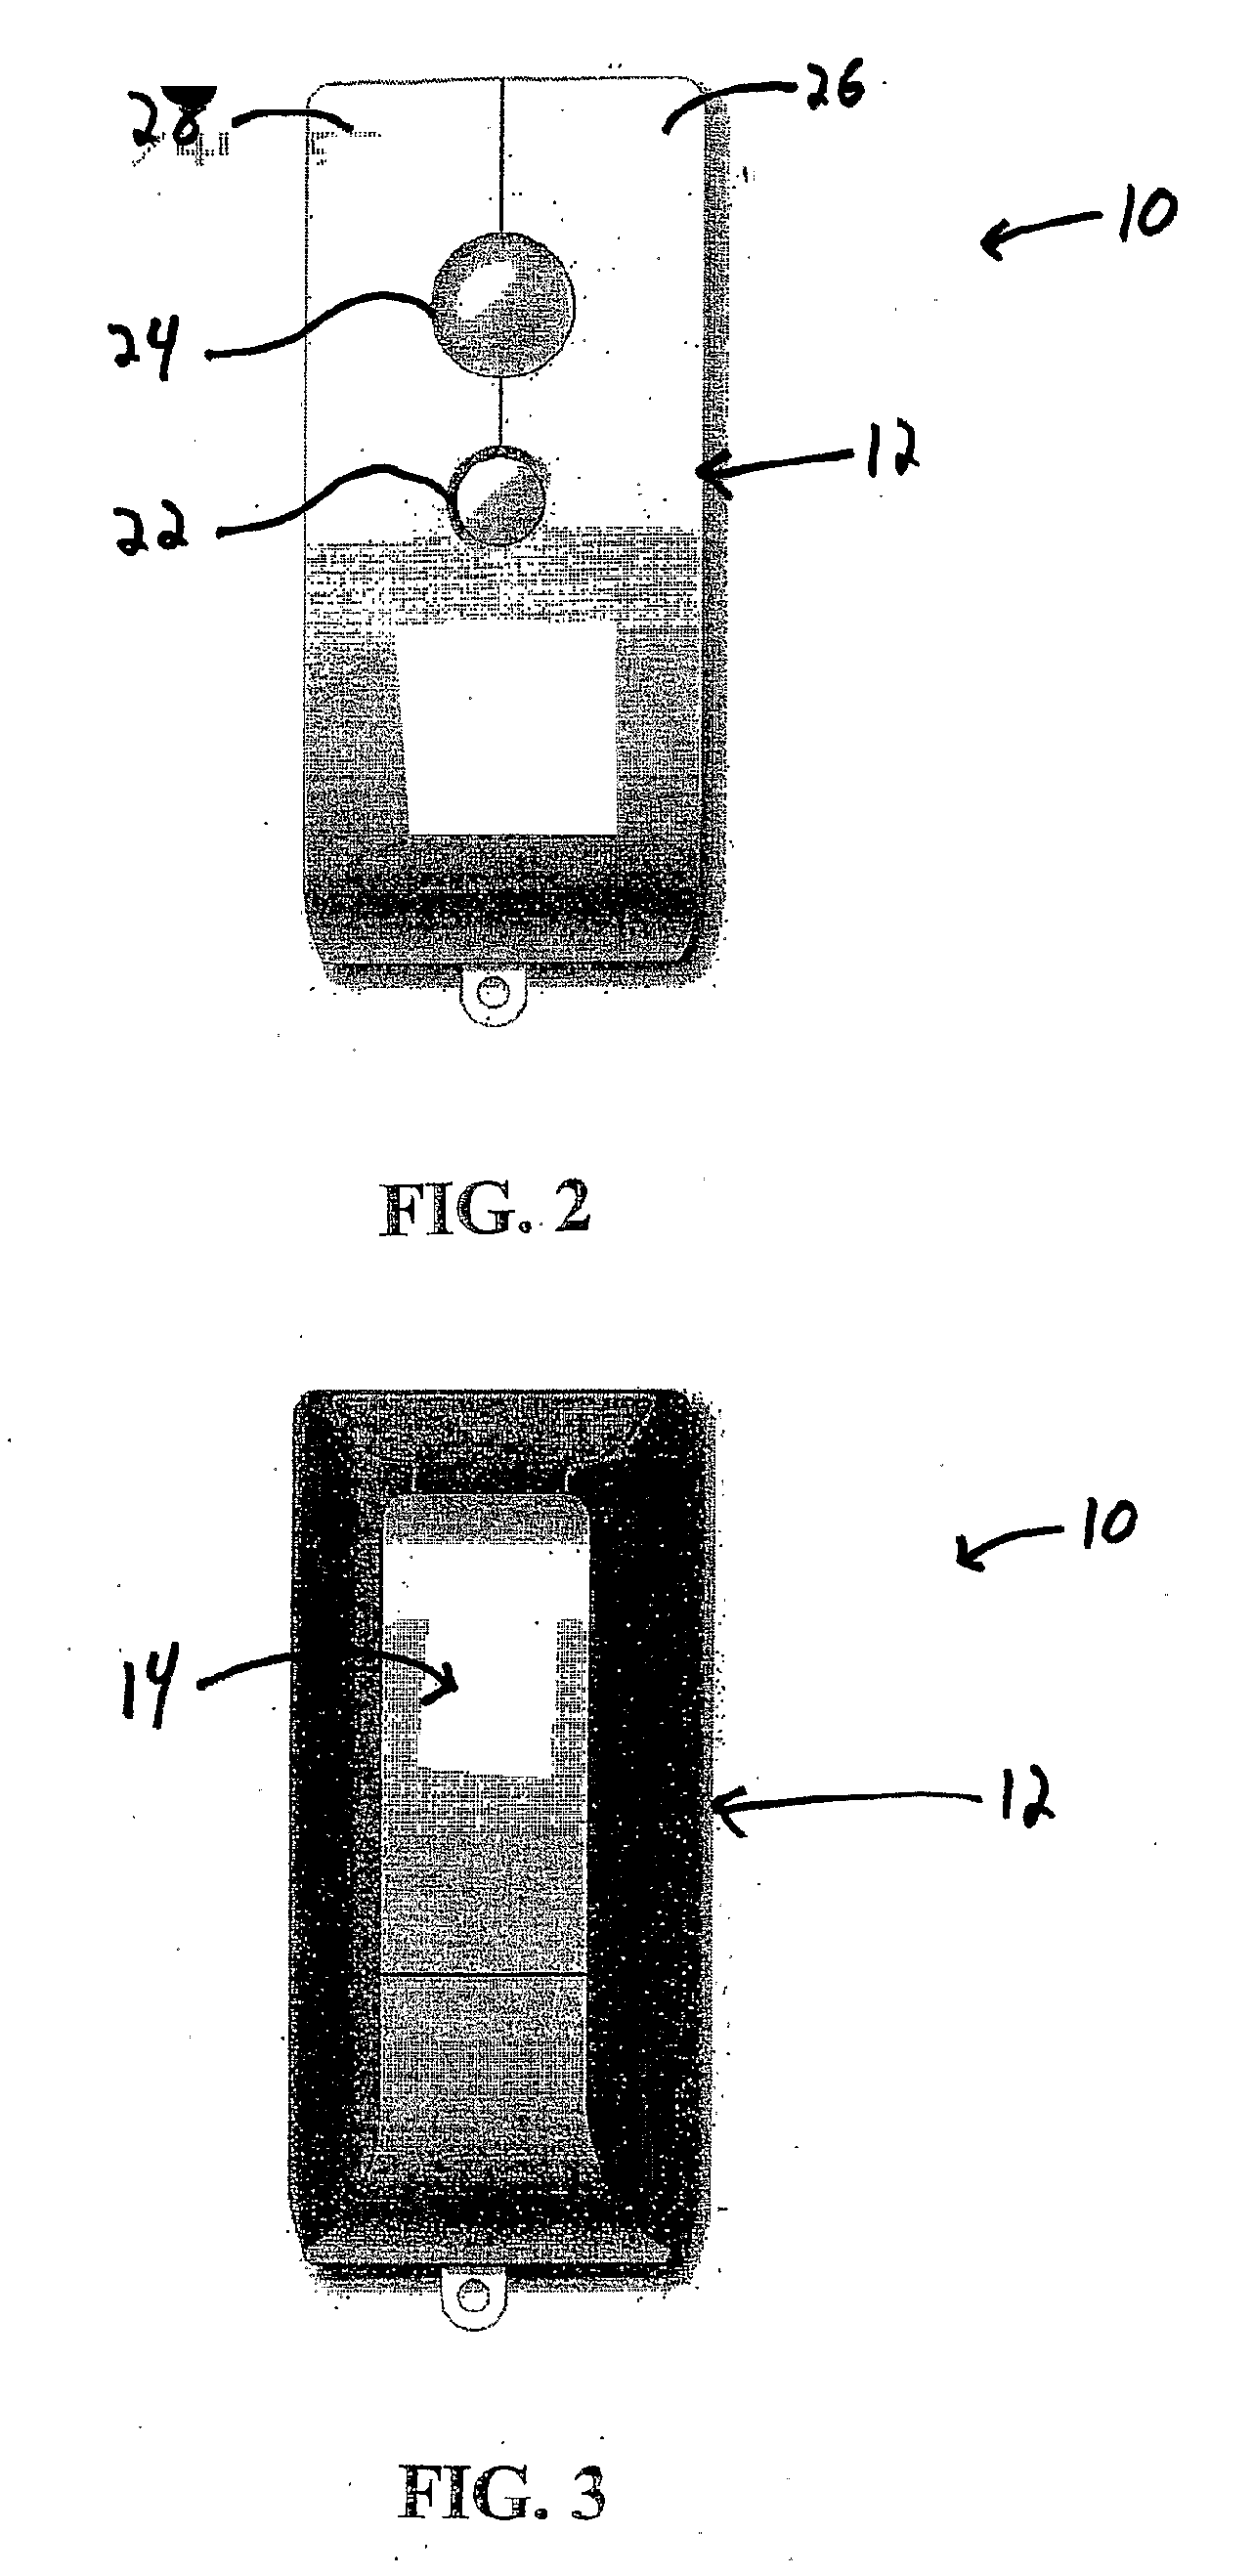 Inertial Sensor-Based Pointing Device With Removable Transceiver